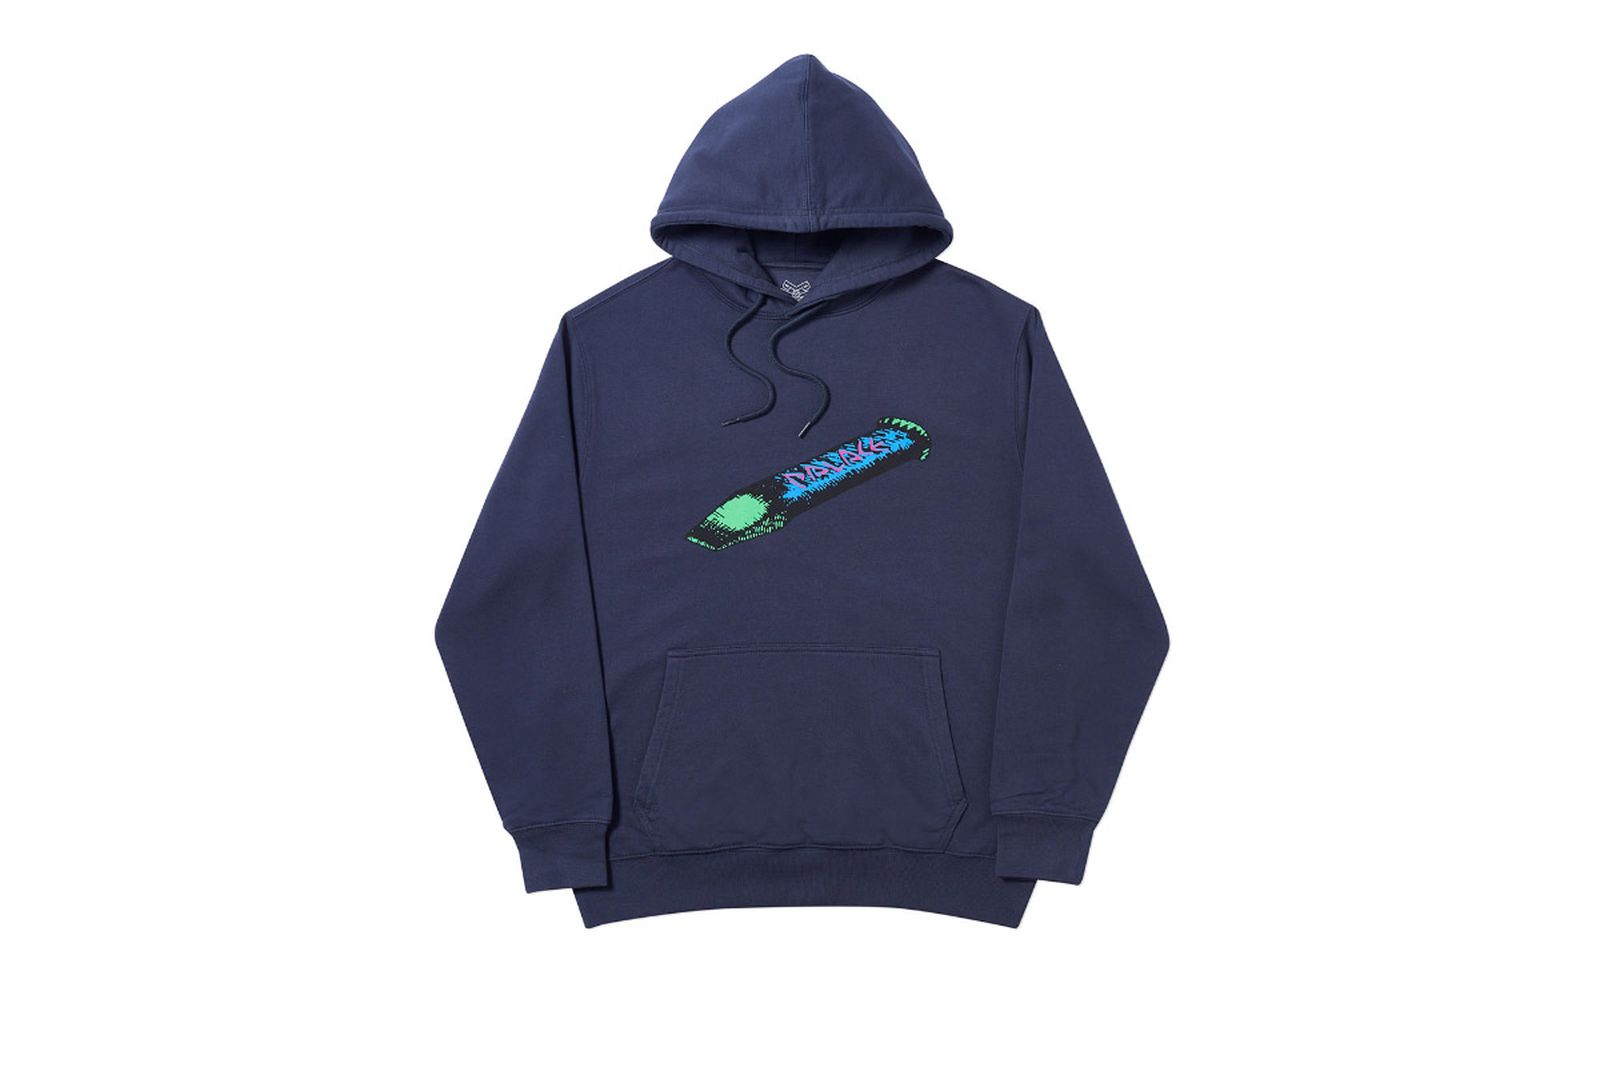 Palace 2019 Autumn Hood Chizzle Up navy front